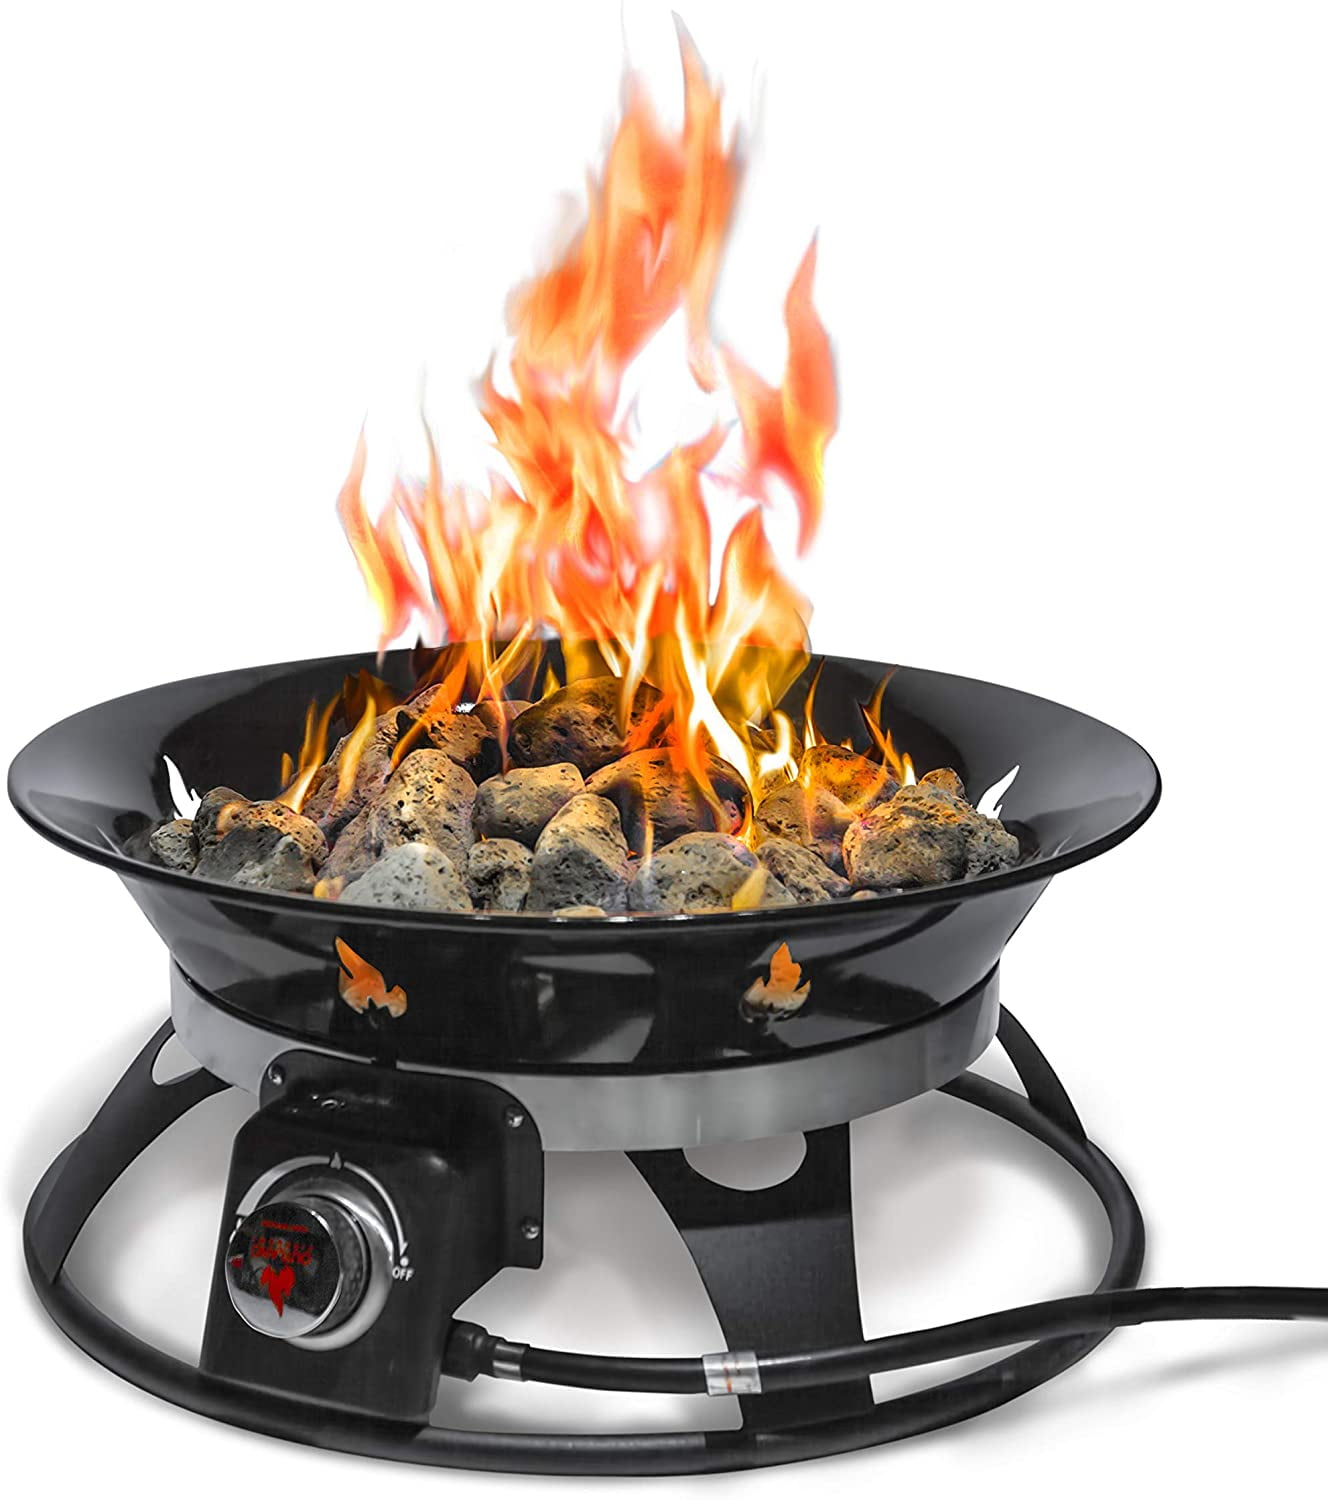 Outland Firebowl 863 Cypress Outdoor, Gas Fire Pit Cooking